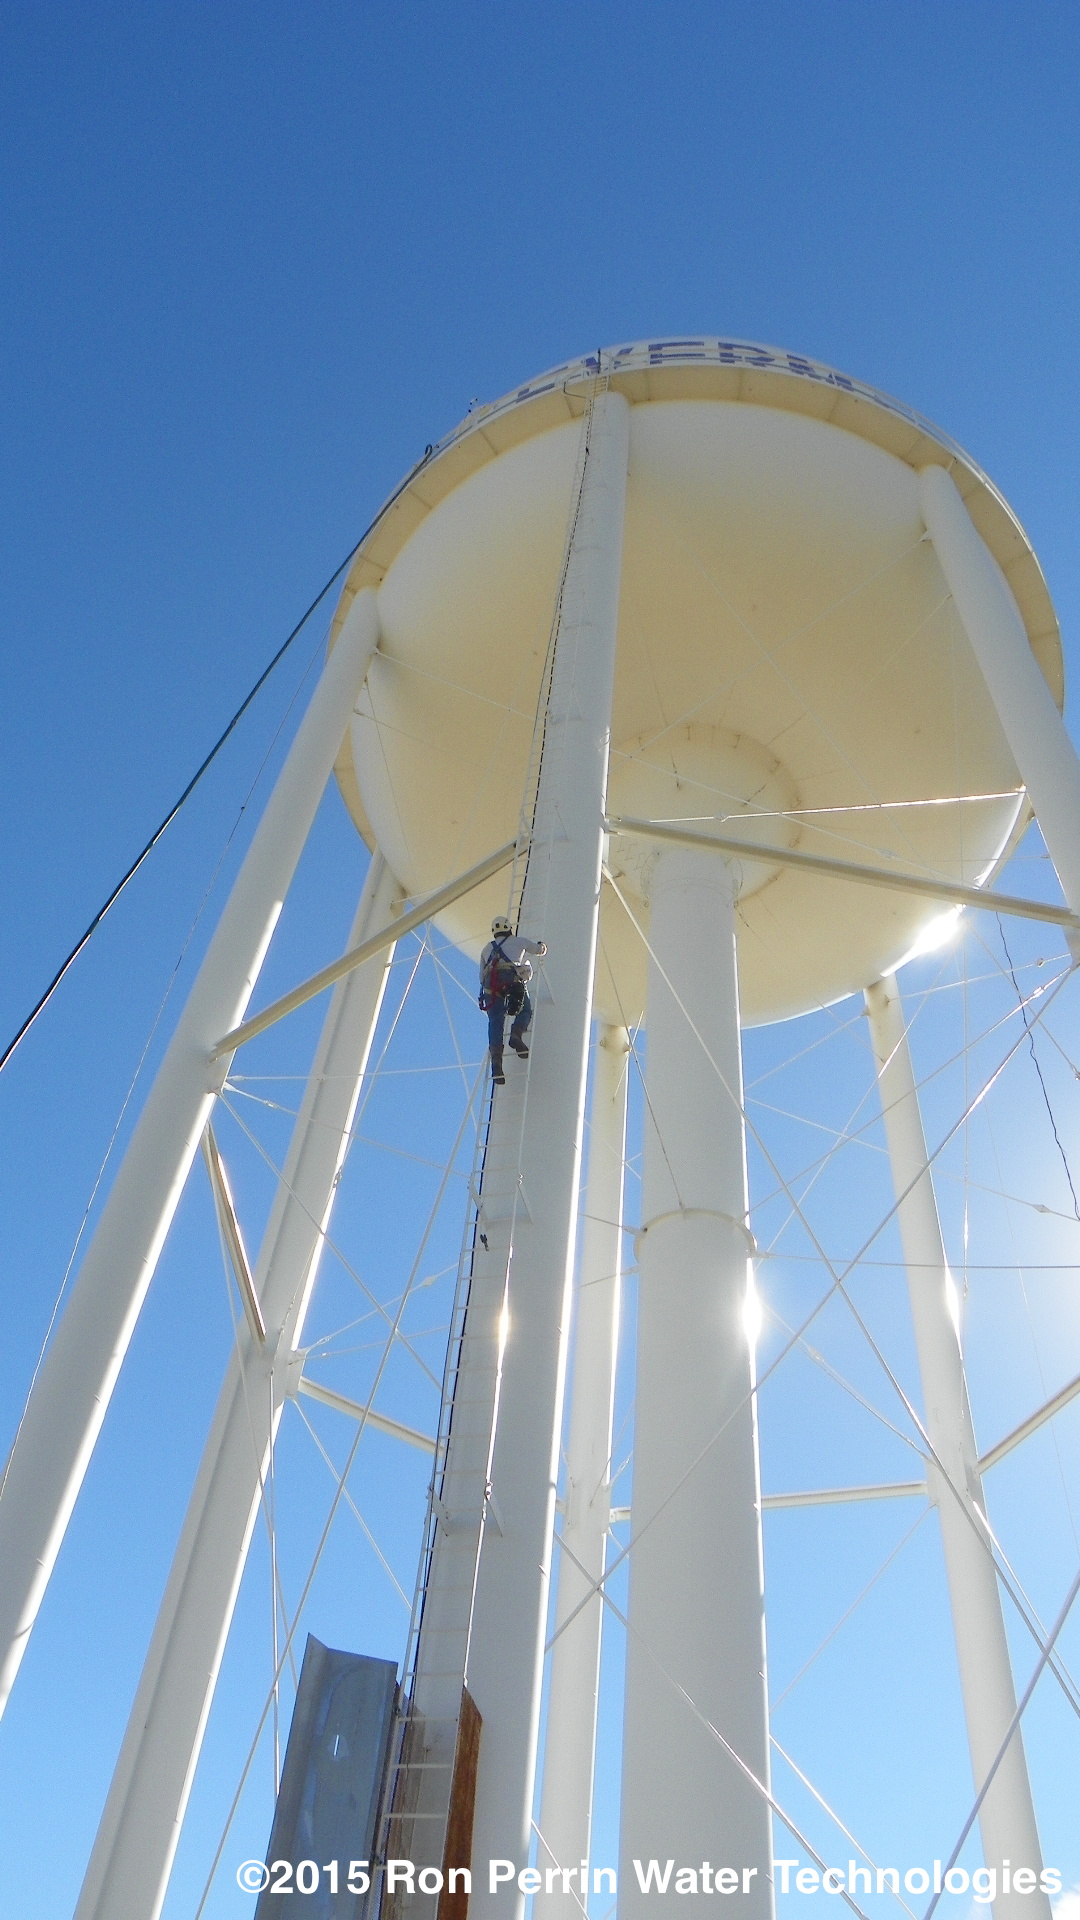 Tank inspection class UT&nbsp;Arlington Texas Water storage tanks and towers are assets that represent a major capital investment. In 2015 I dev...